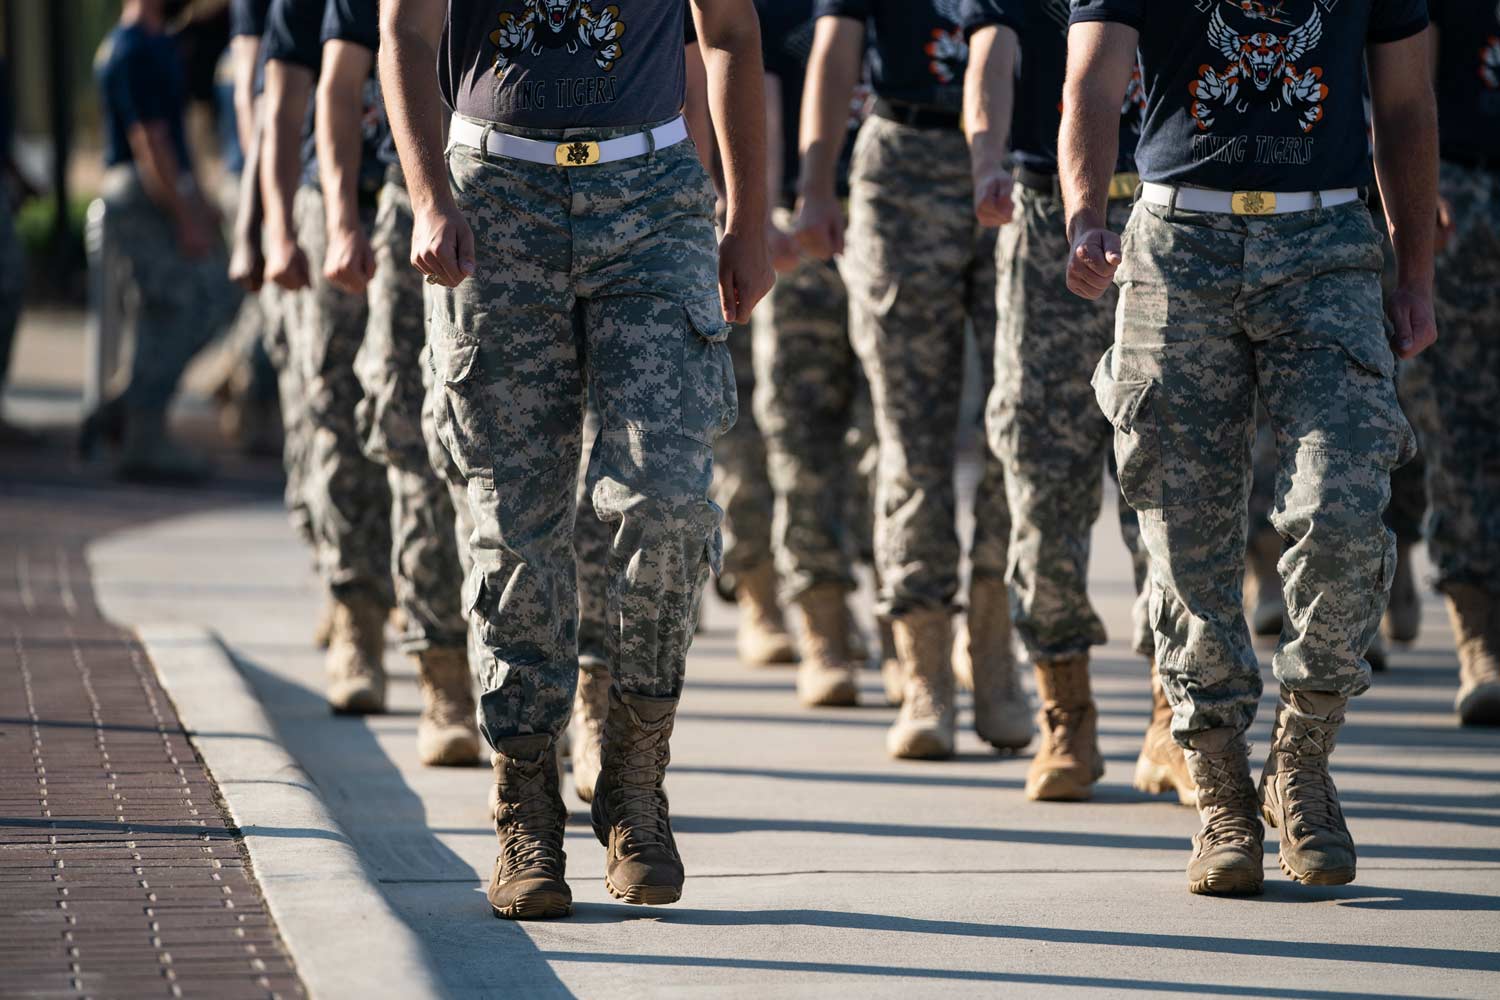 Corps of Cadets members march to the brazos in their fatigues